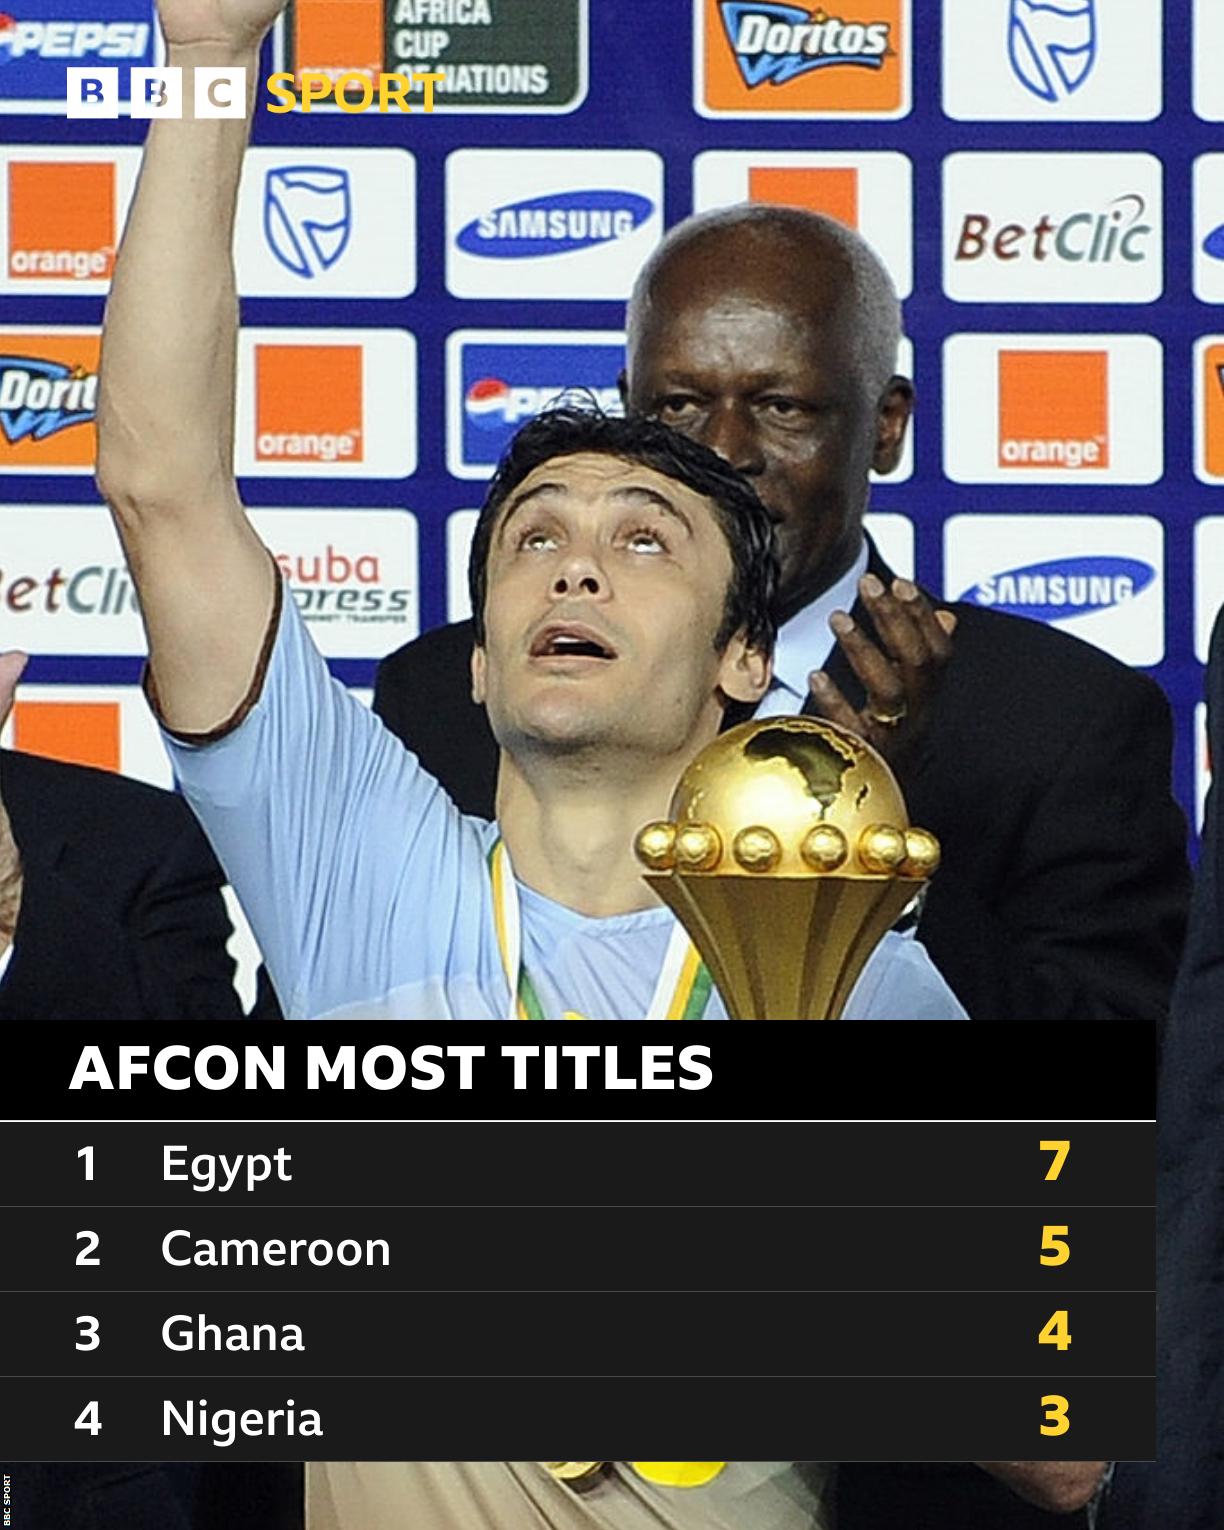 Kamel Ahmed Hassan lift di Africa Cup of Nations trophy for Angola for 2010